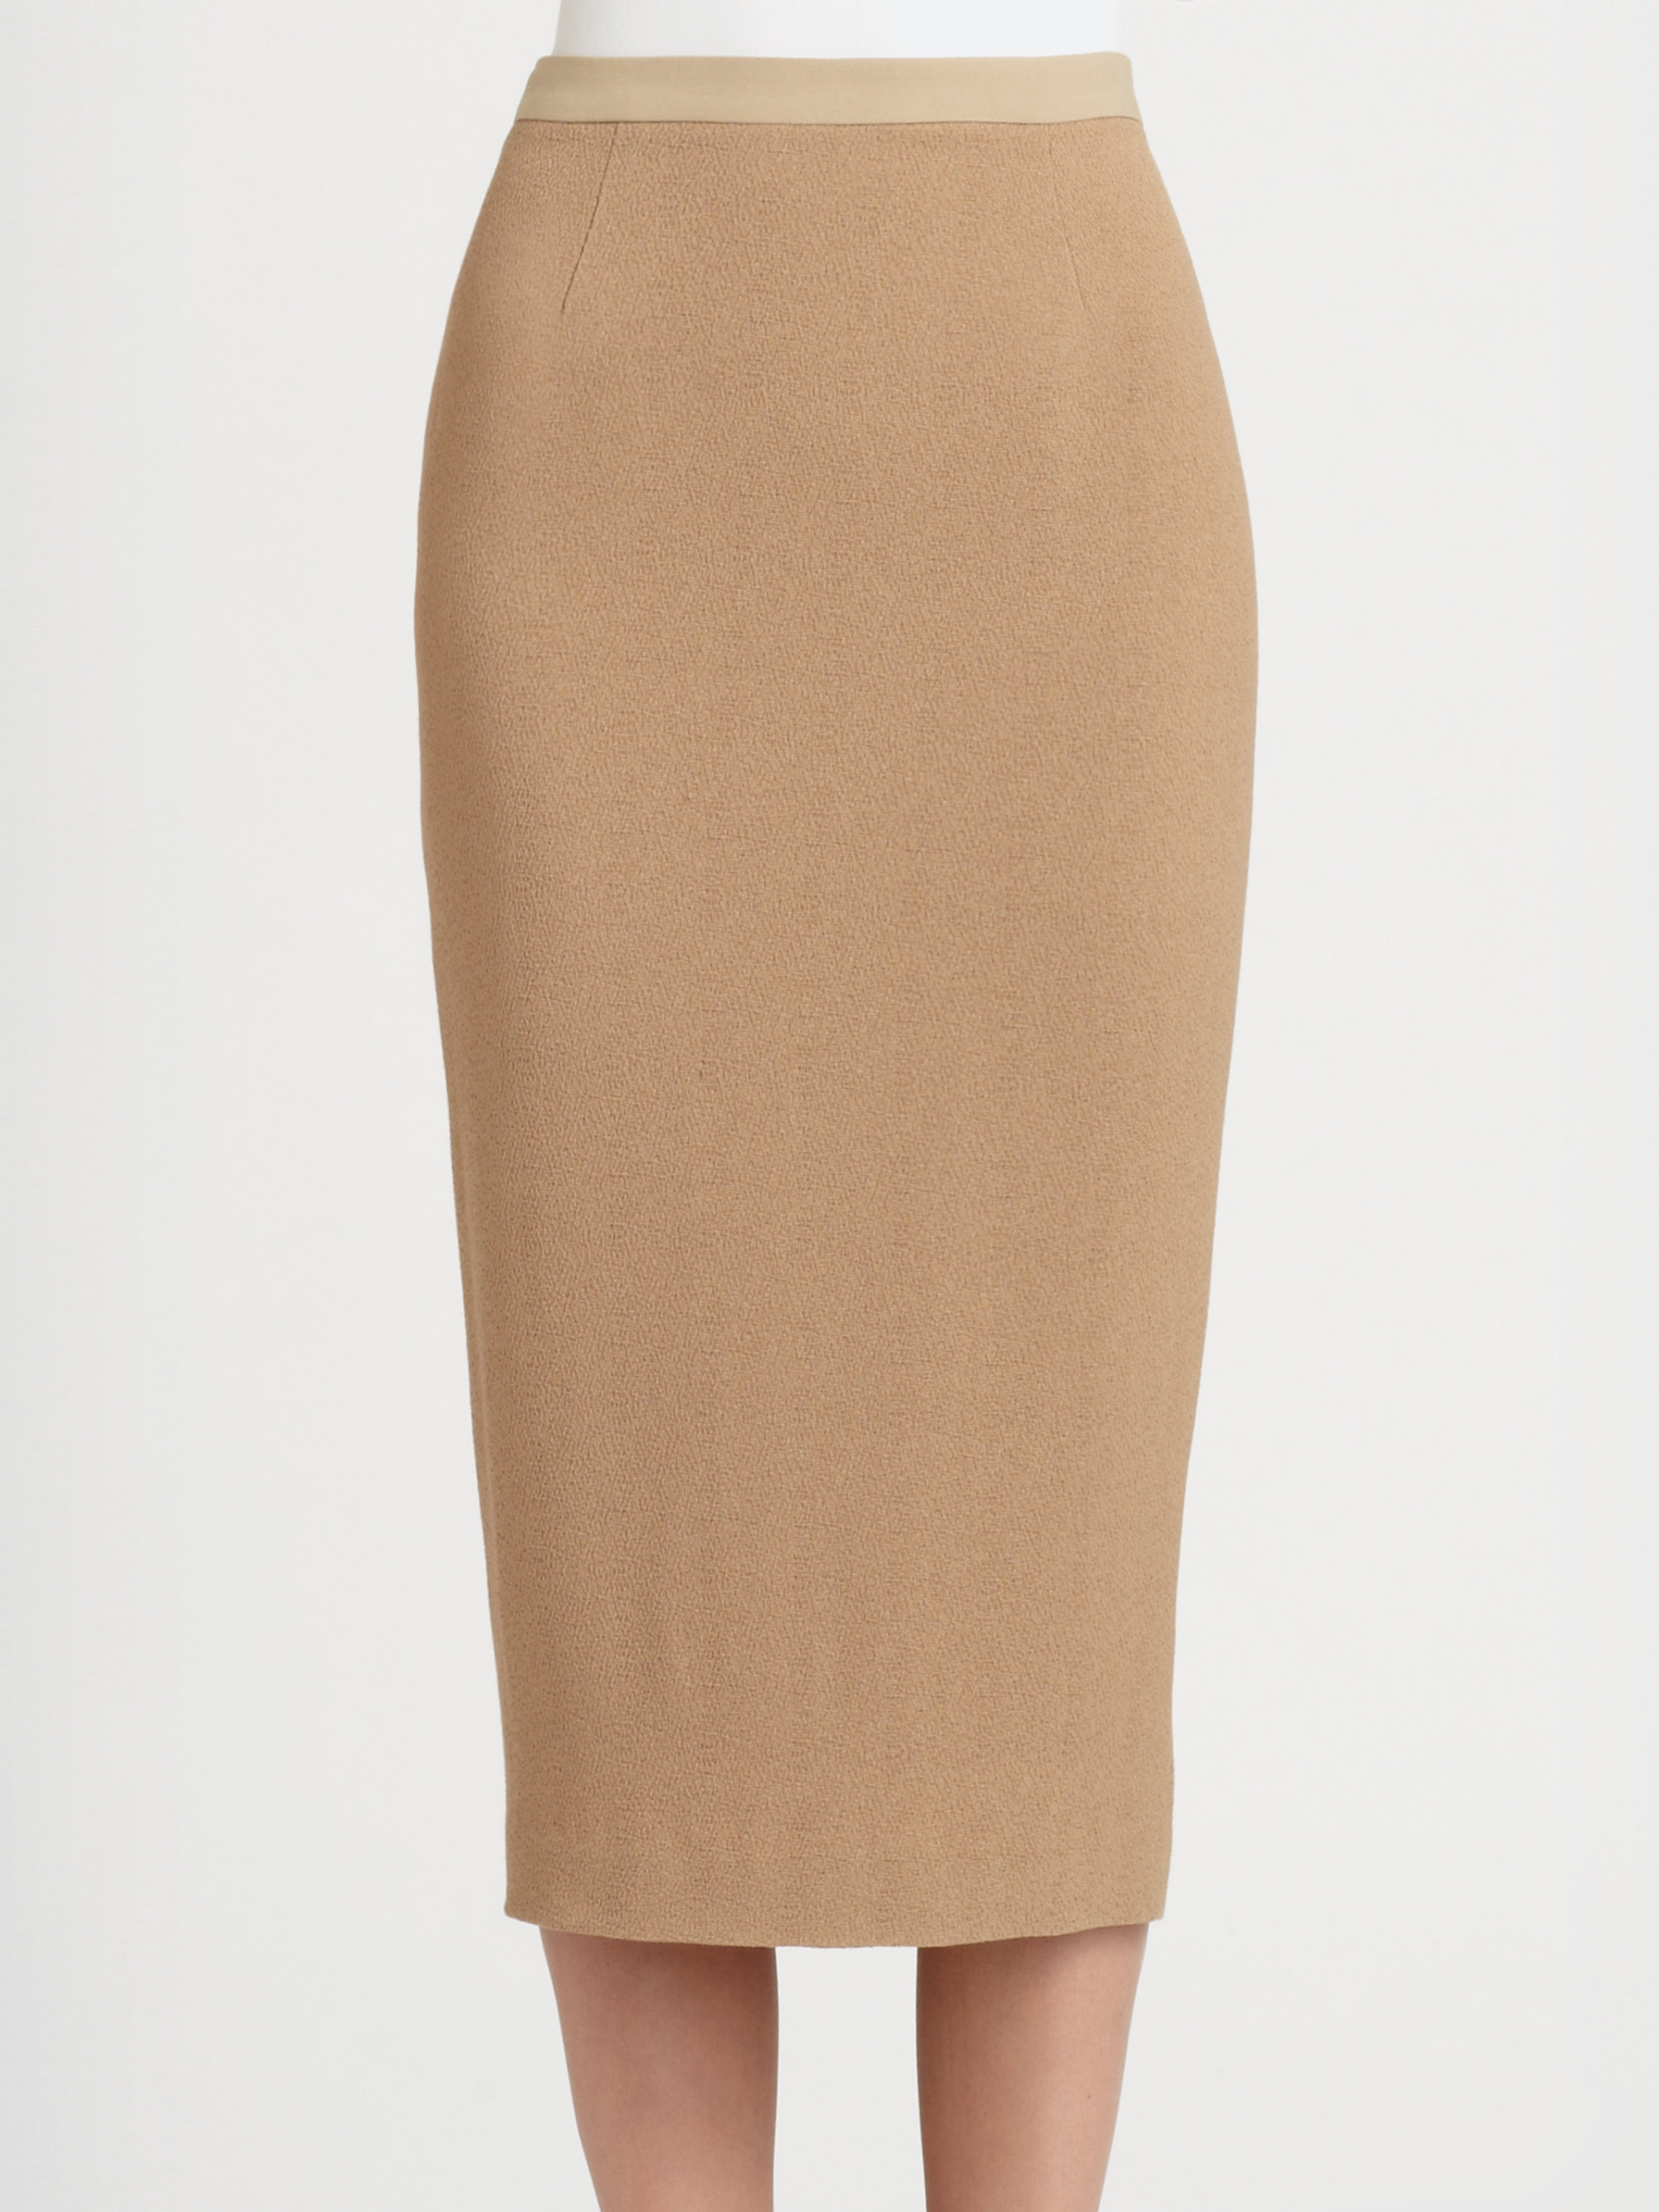 A.l.c. Thea Long Pencil Skirt in Gray | Lyst